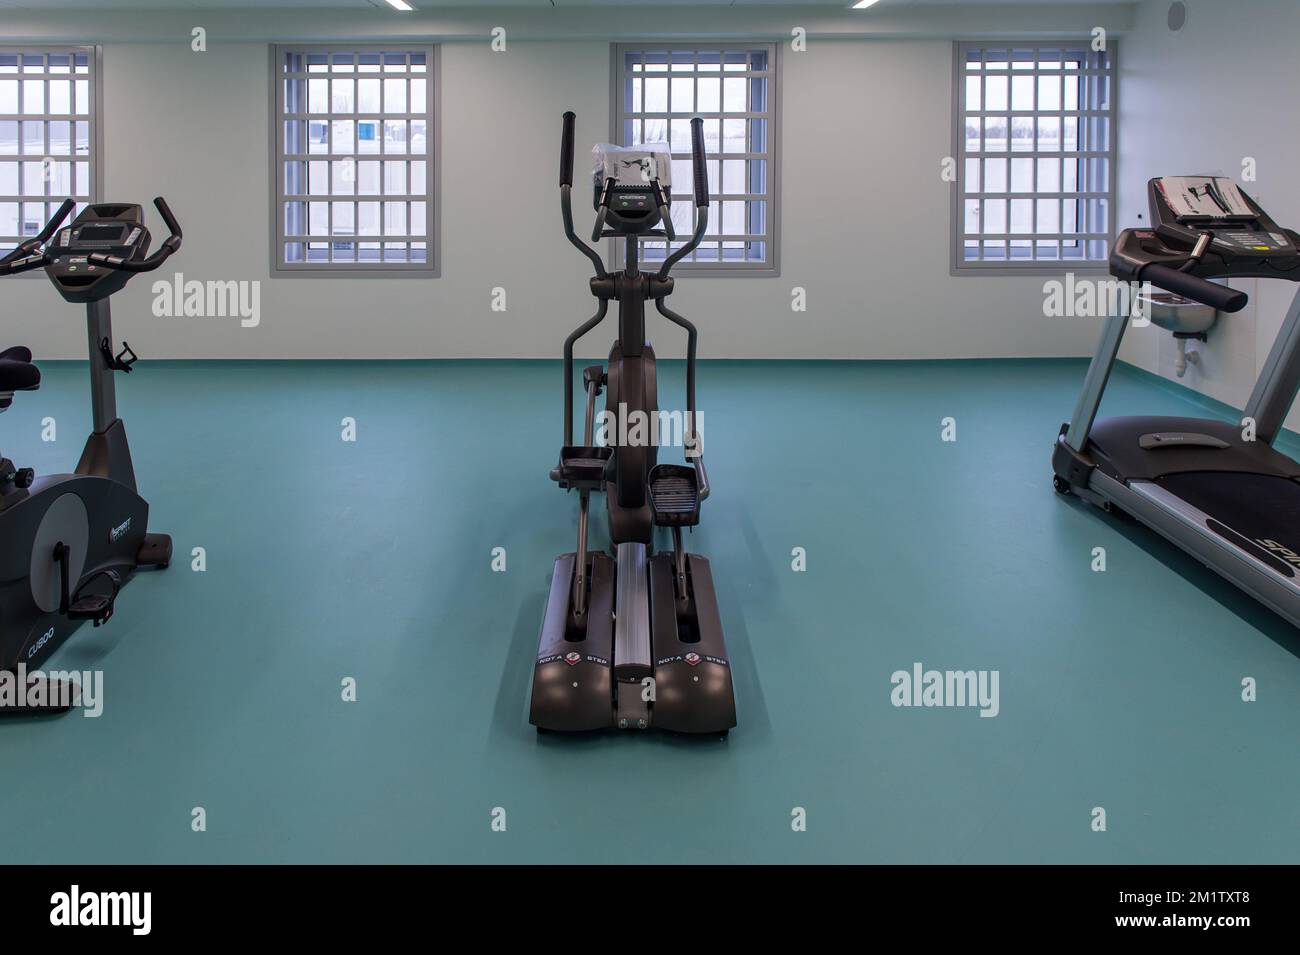 20140214 - BEVEREN-WAAS, BELGIUM: Illustration picture shows a fitness area during the official opening of the new jail in Melsele, Beveren, which is one of the four new prisons planned in Belgium to enlarge the number of cells. BELGA PHOTO JONAS ROOSENS Stock Photo